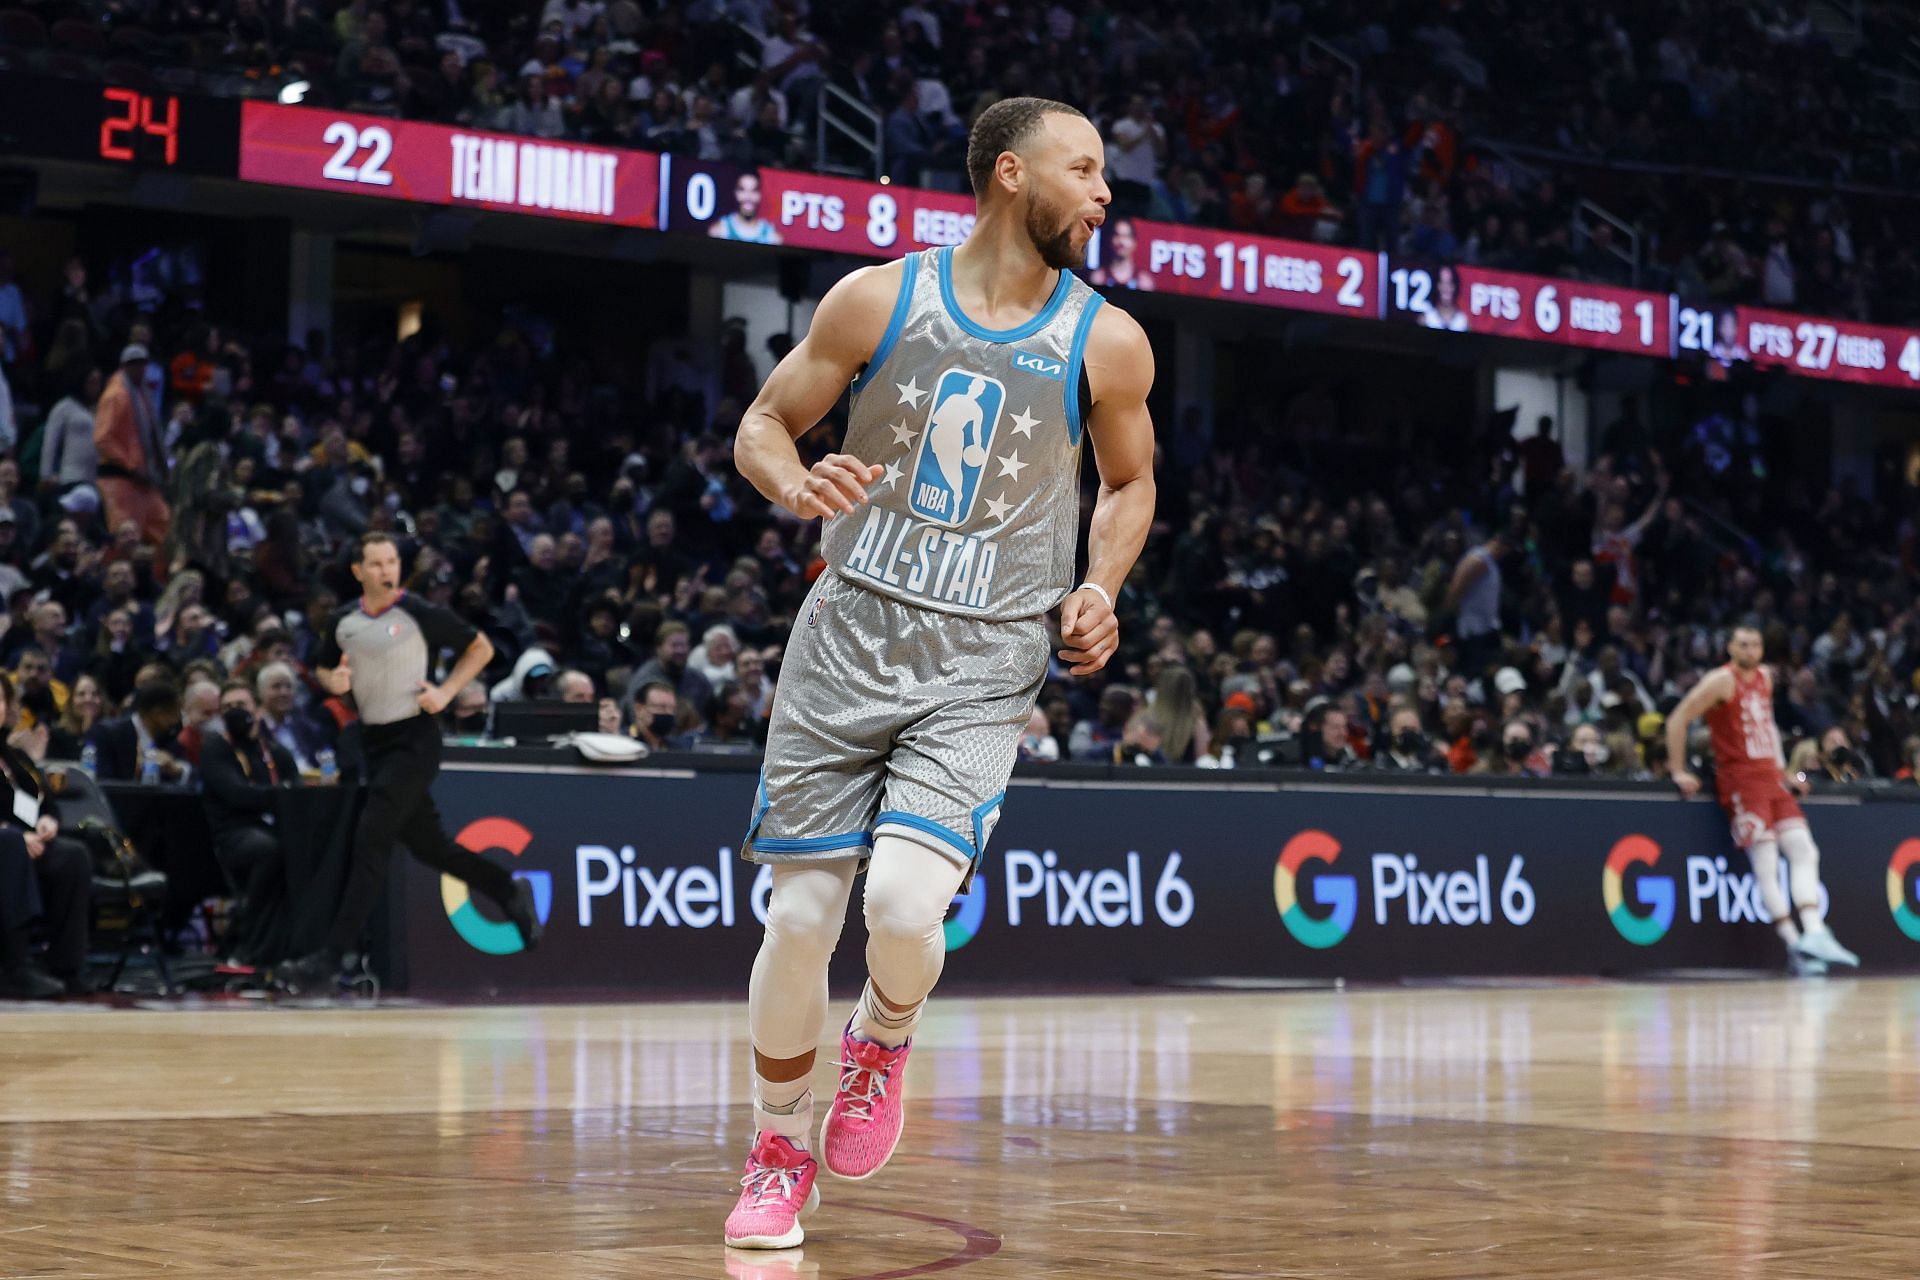 Steph Curry at the 2022 NBA All-Star Game